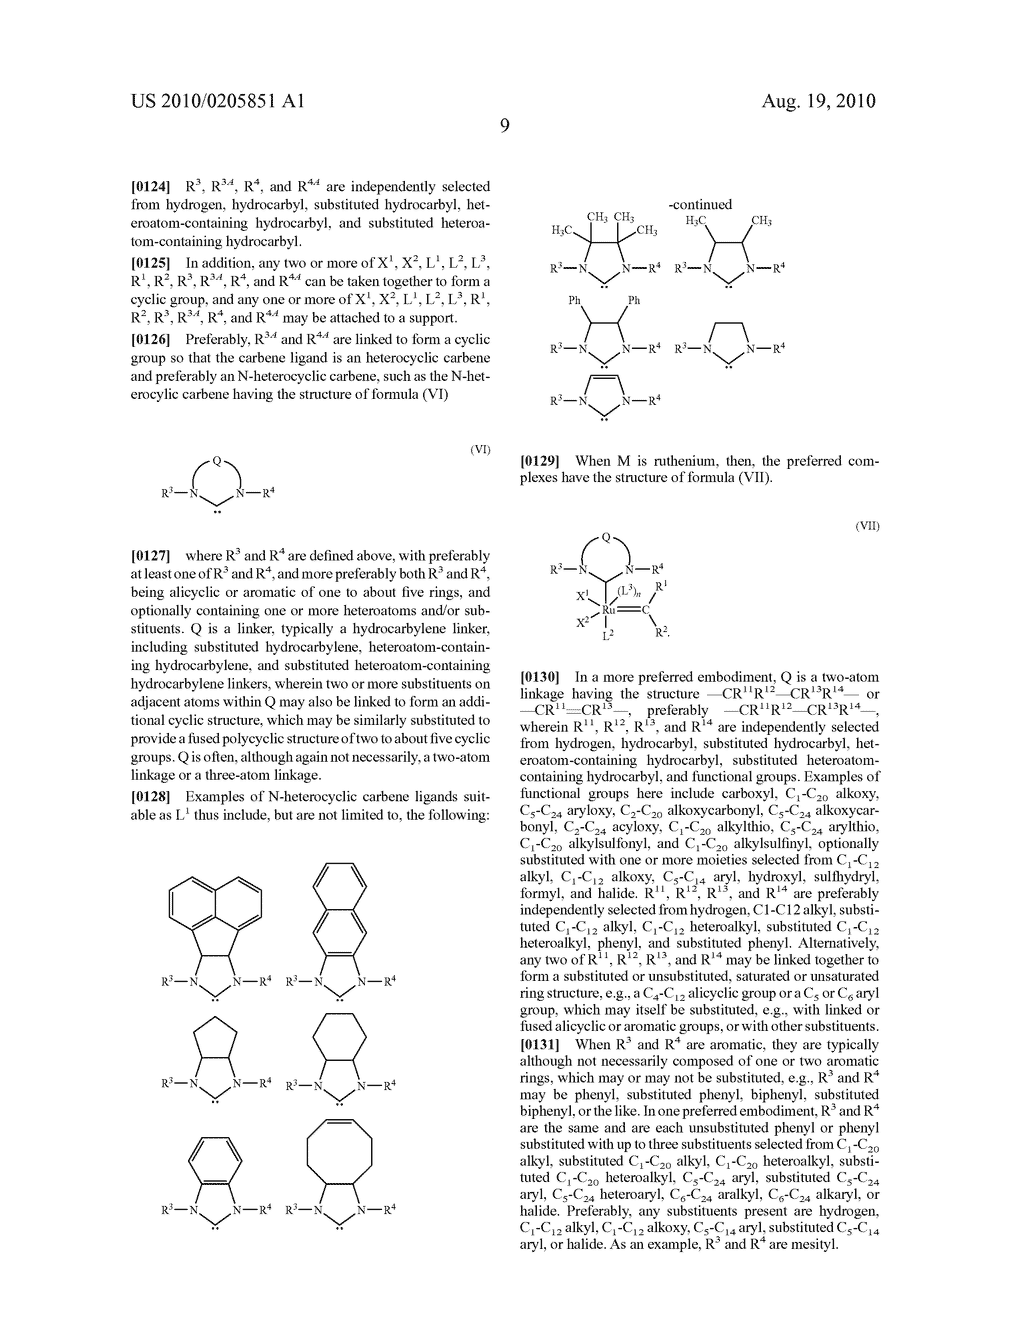 HYBRID WAX COMPOSITIONS FOR USE IN COMPRESSION MOLDED WAX ARTICLES SUCH AS CANDLES - diagram, schematic, and image 29